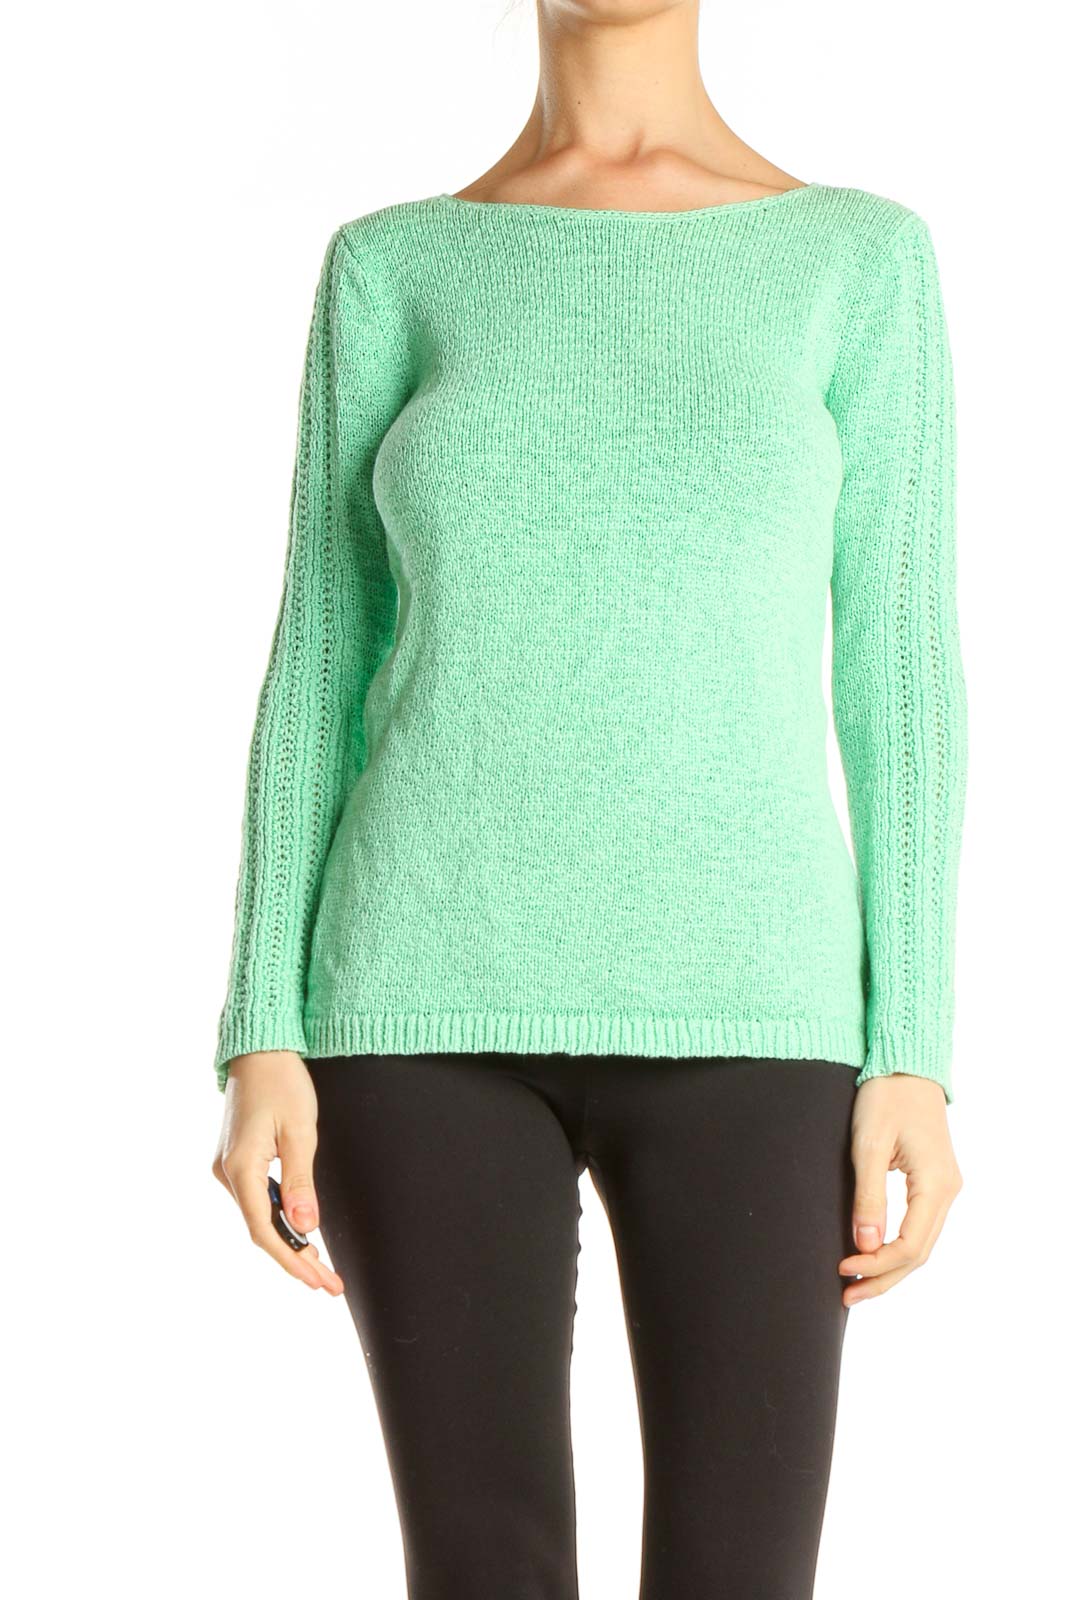 Green Knitted Light Sweater Front